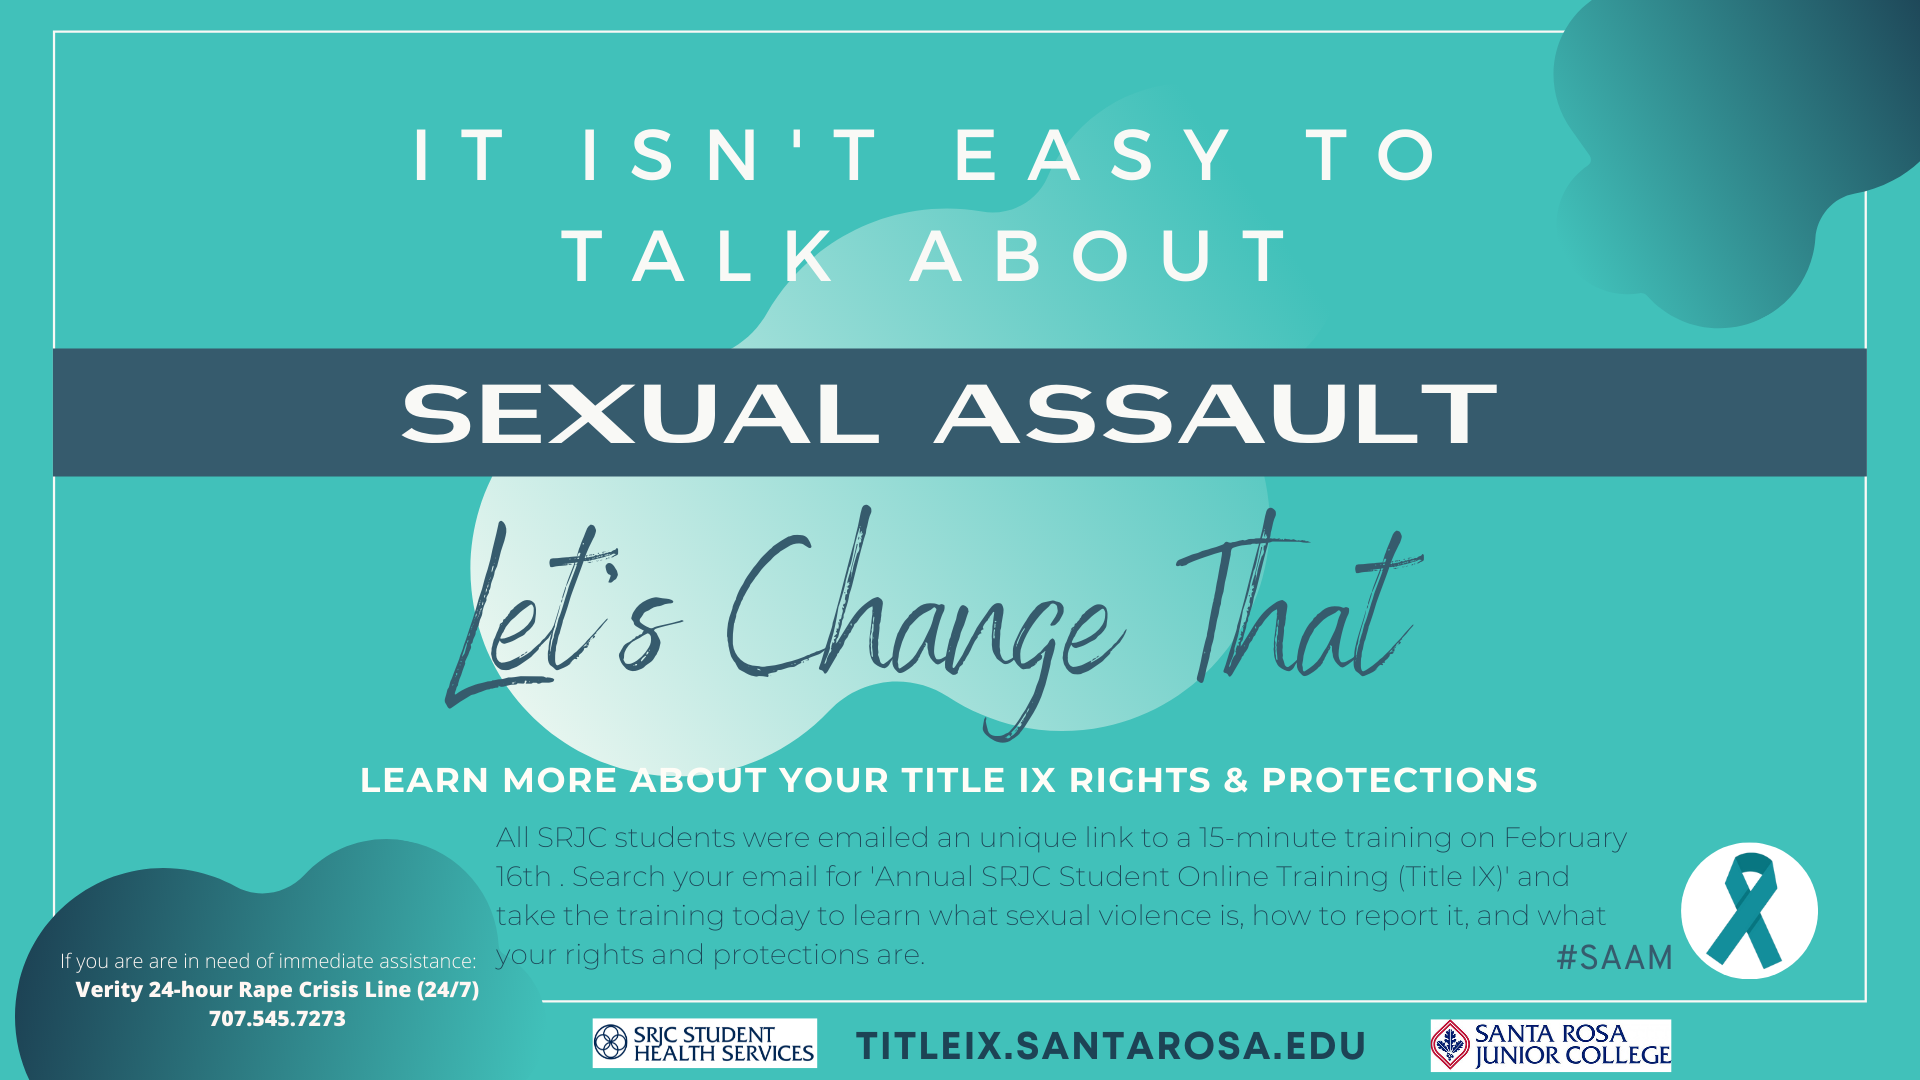 It Isn't Easy to Talk About Sexual Assault: Let's Change That. Learn More about your Title IX rights and protections. All SRJC students were emailed an unique link to a 15 minute training on February 16th. Search your email for Annual Student Online Training and take the training today.